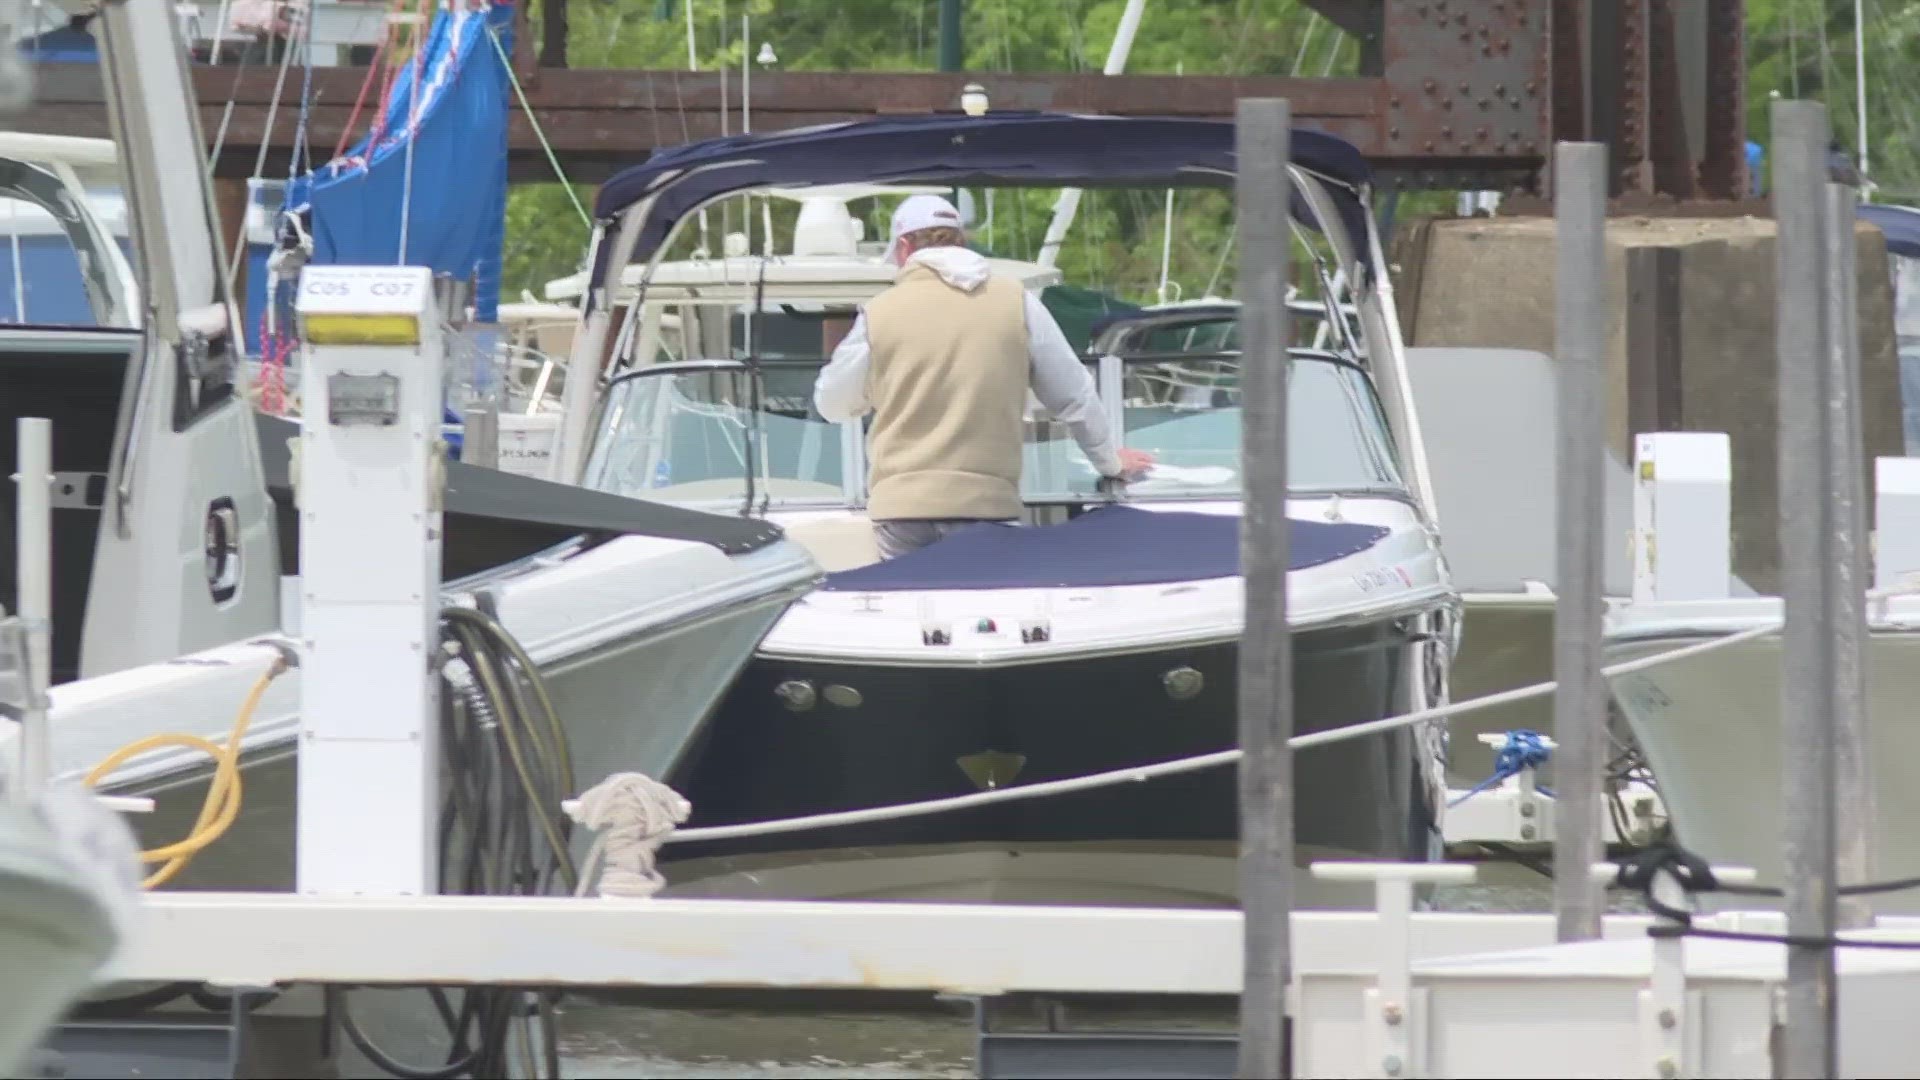 Boating season has officially begun here in Northeast Ohio.  But fun on the water comes with some risks. so you'll want to make sure safety is a top priority.